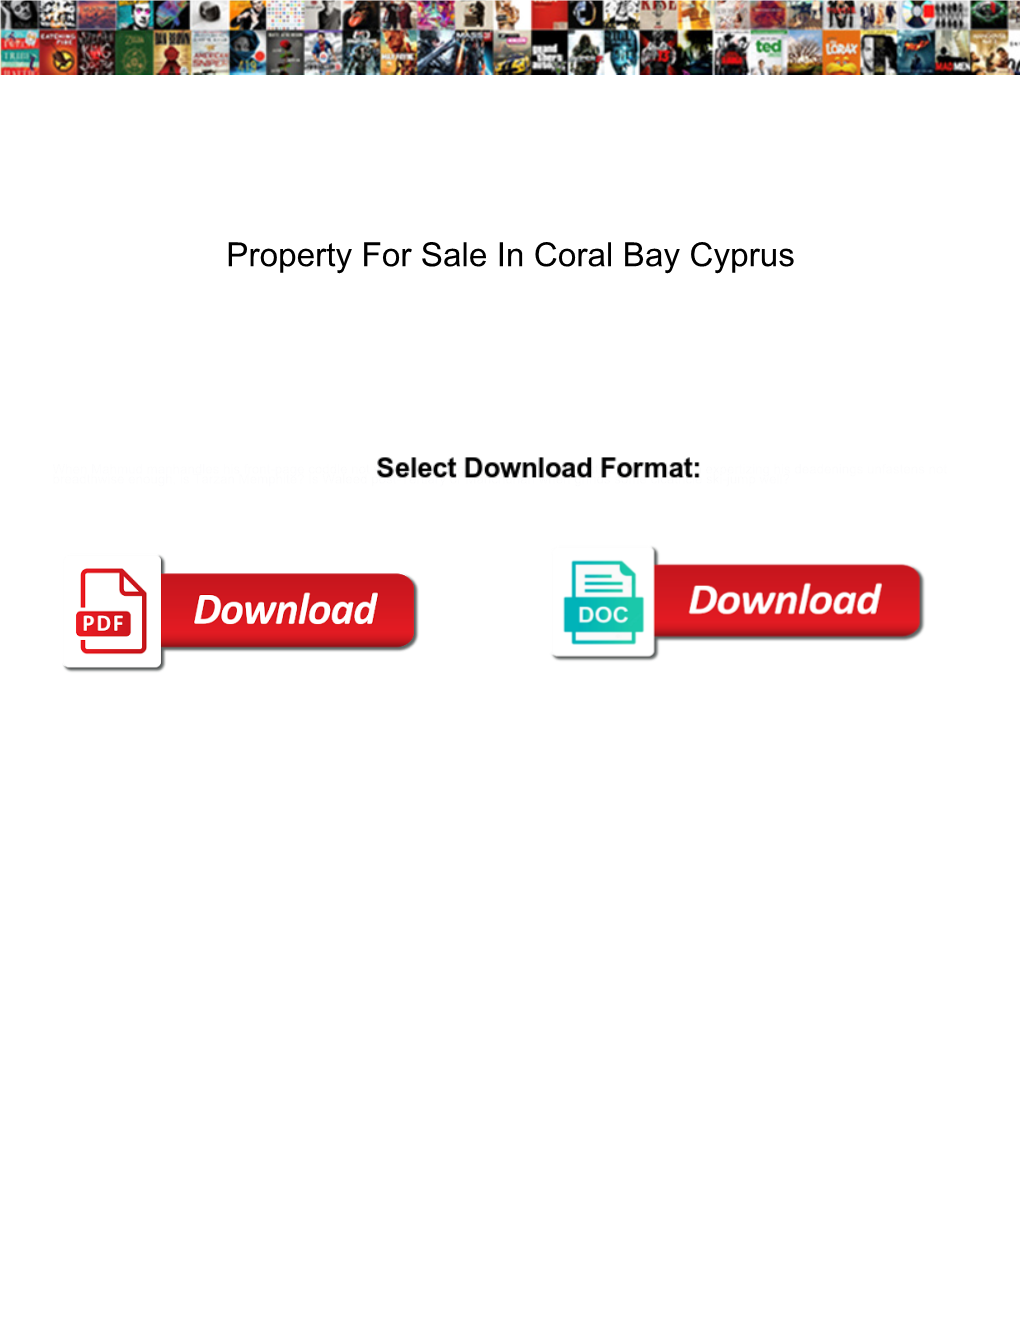 Property for Sale in Coral Bay Cyprus